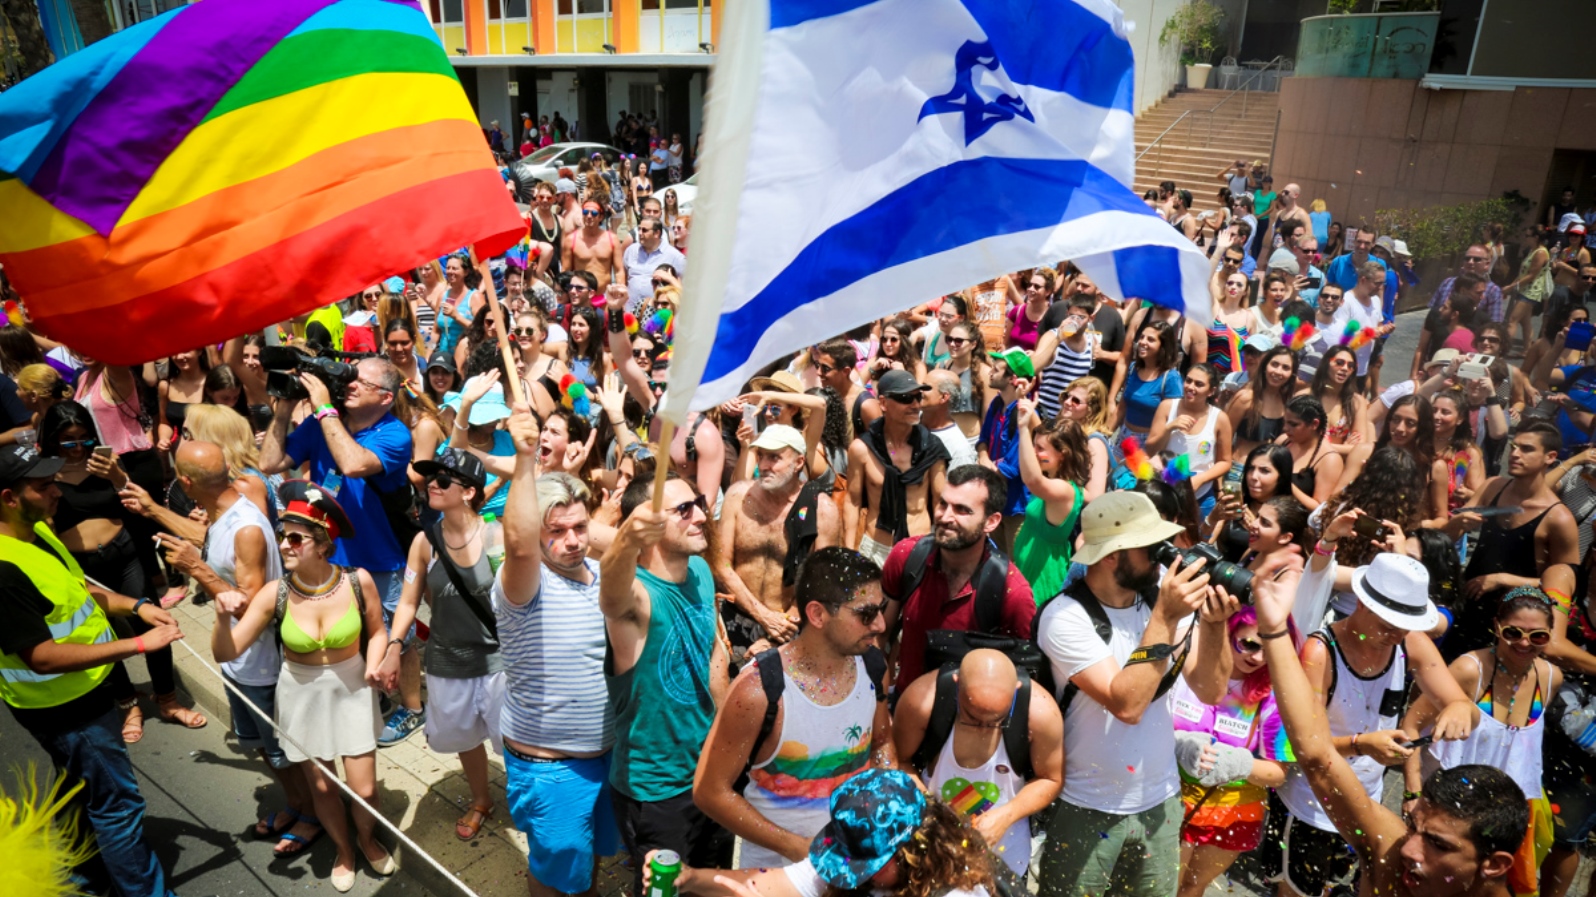 Israeli and gay pride at the 2016 Pride Parade in Tel Aviv. Photo by Guy Yechiely